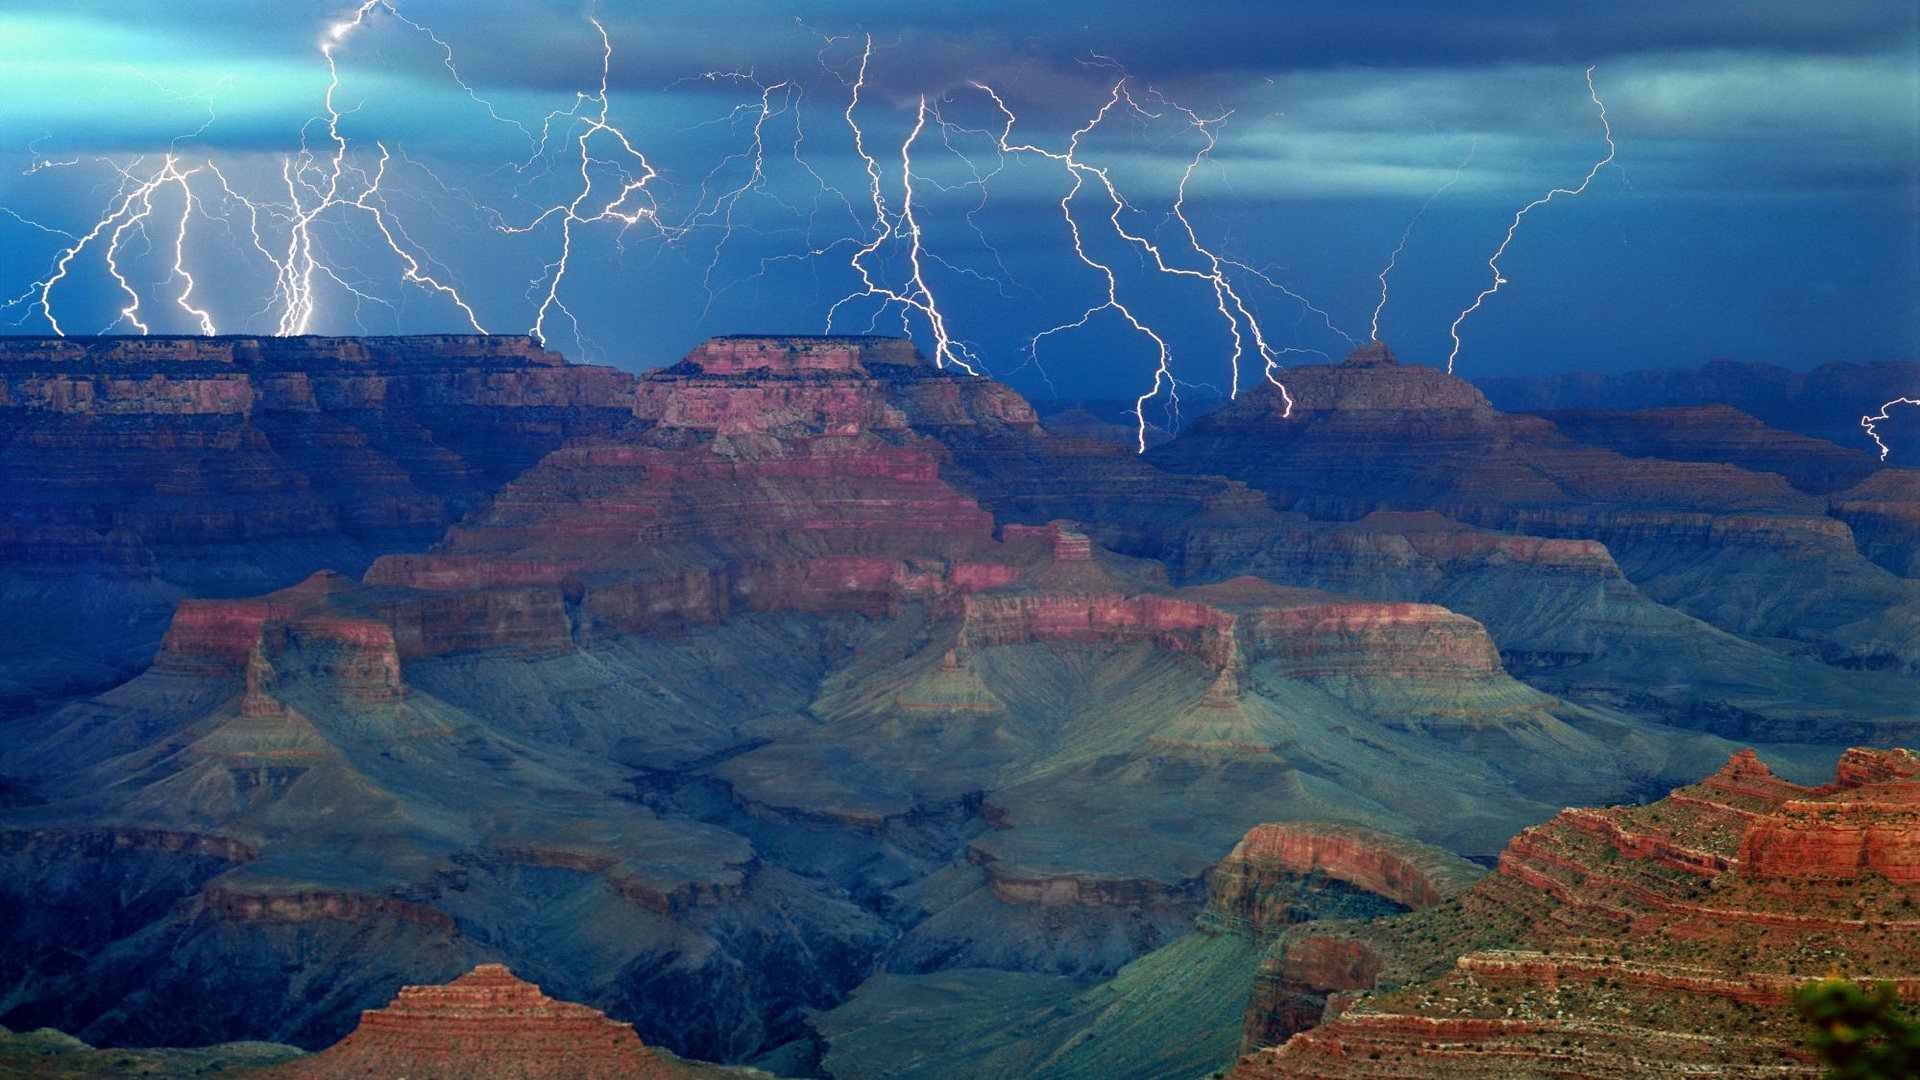 micromax live wallpaper,sky,natural landscape,canyon,lightning,geology